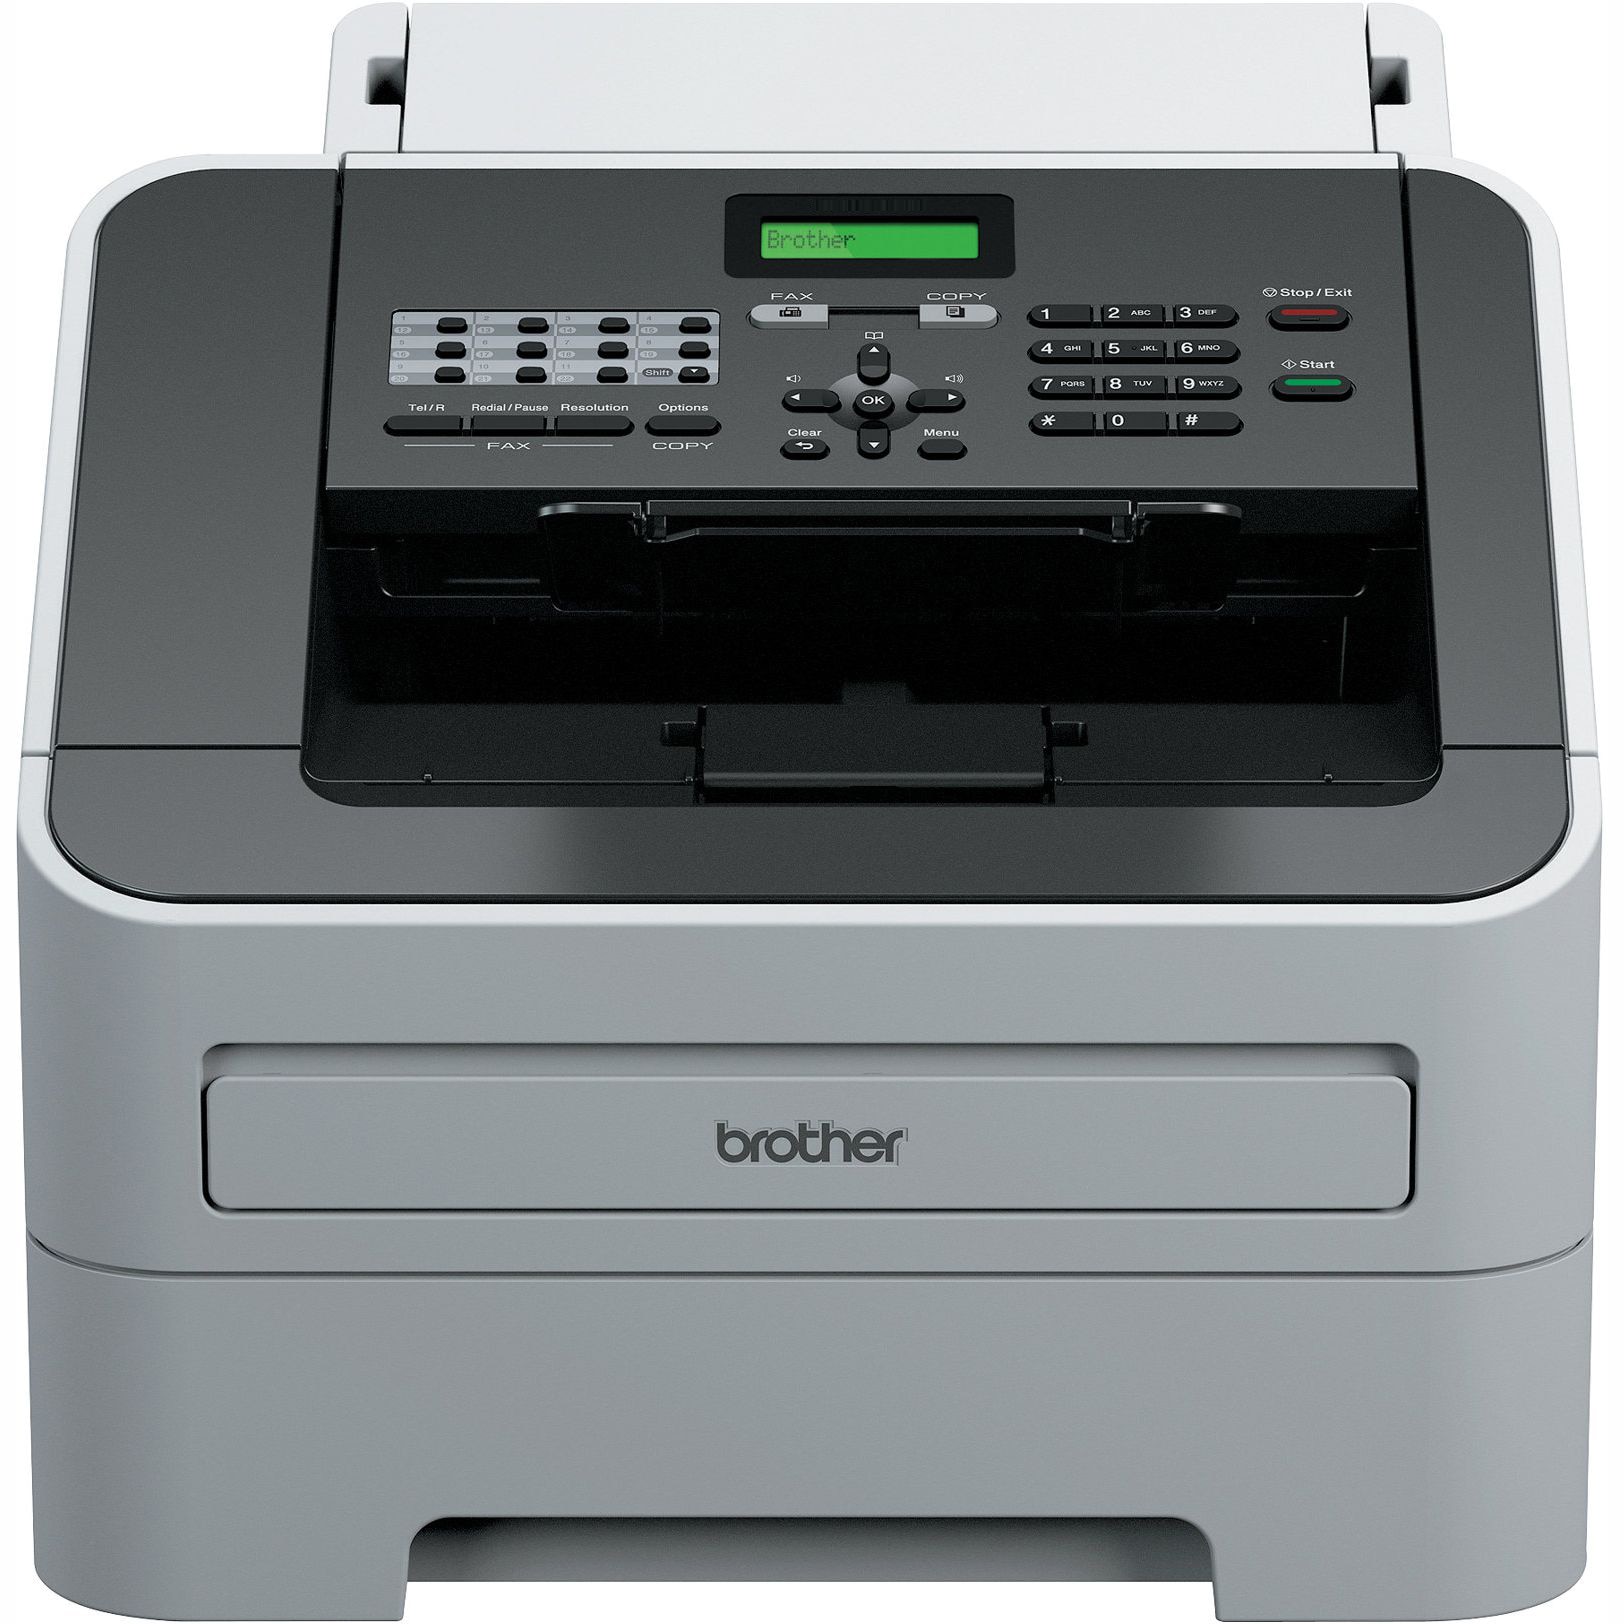 Fax Brother Laser 2845 eMAG.ro